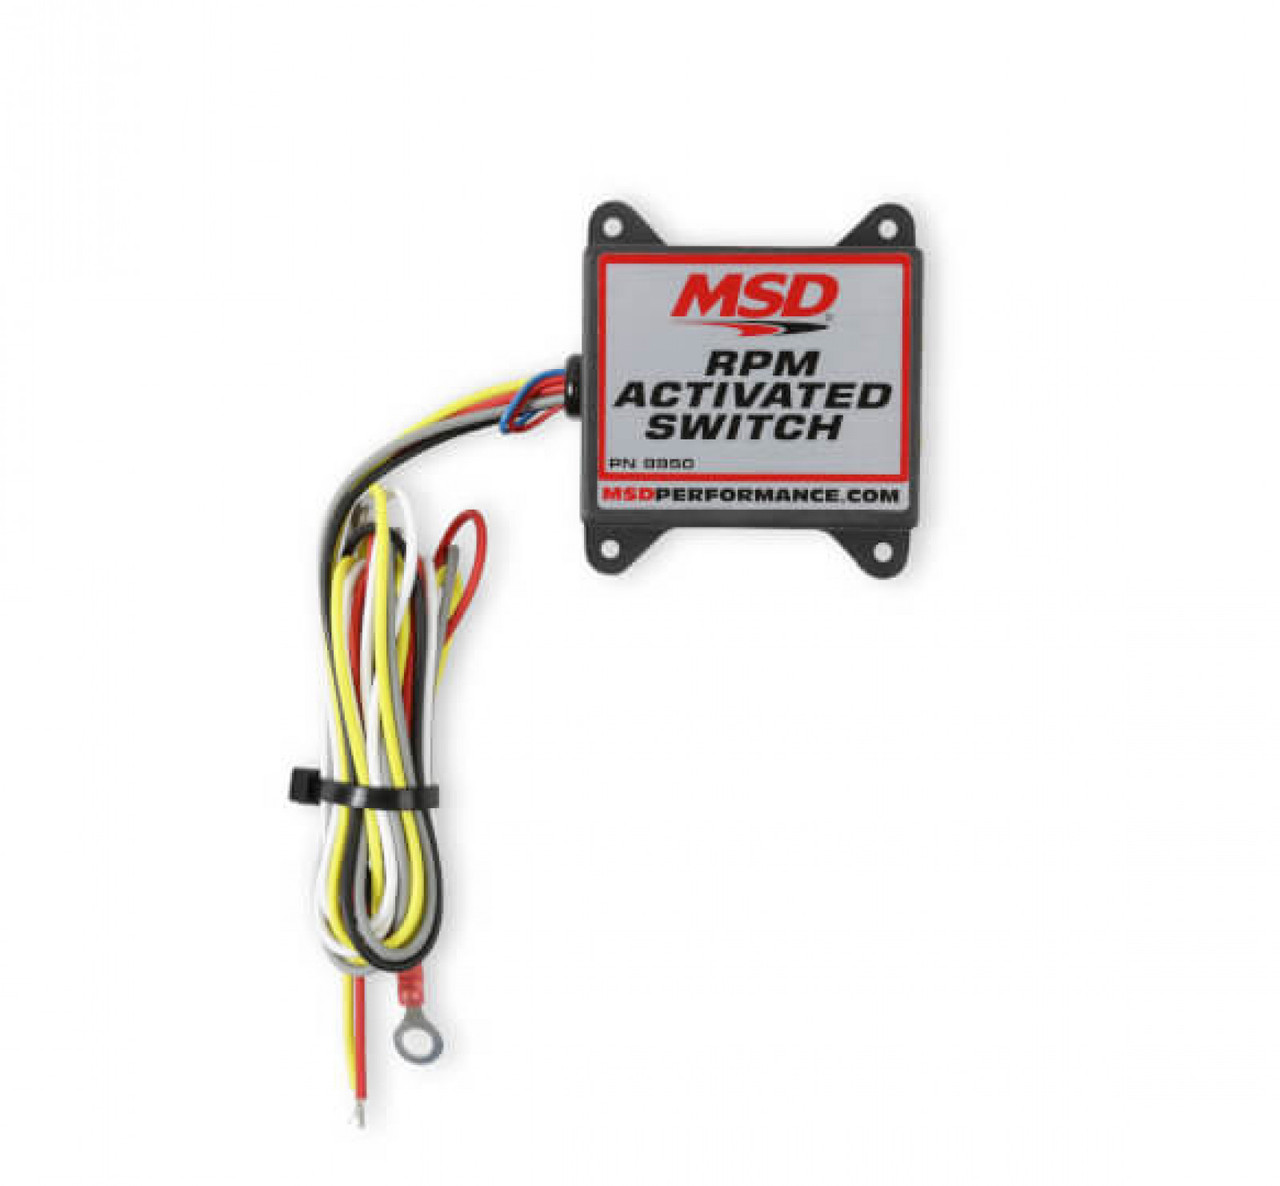 RPM Activated Switch (MSD-28950)